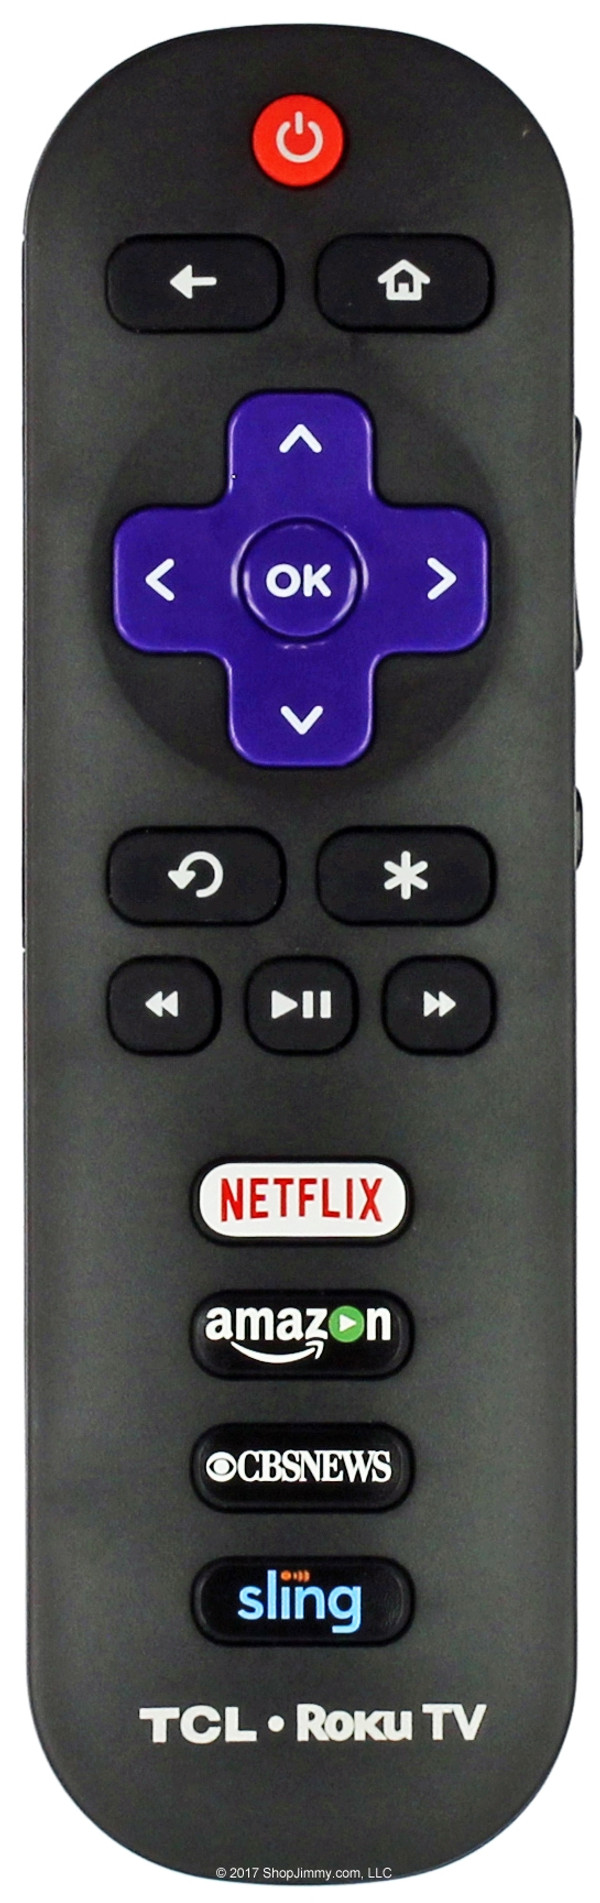 TCL RC280 Roku Remote Control w/CBS NEWS and Sling Buttons--NEW